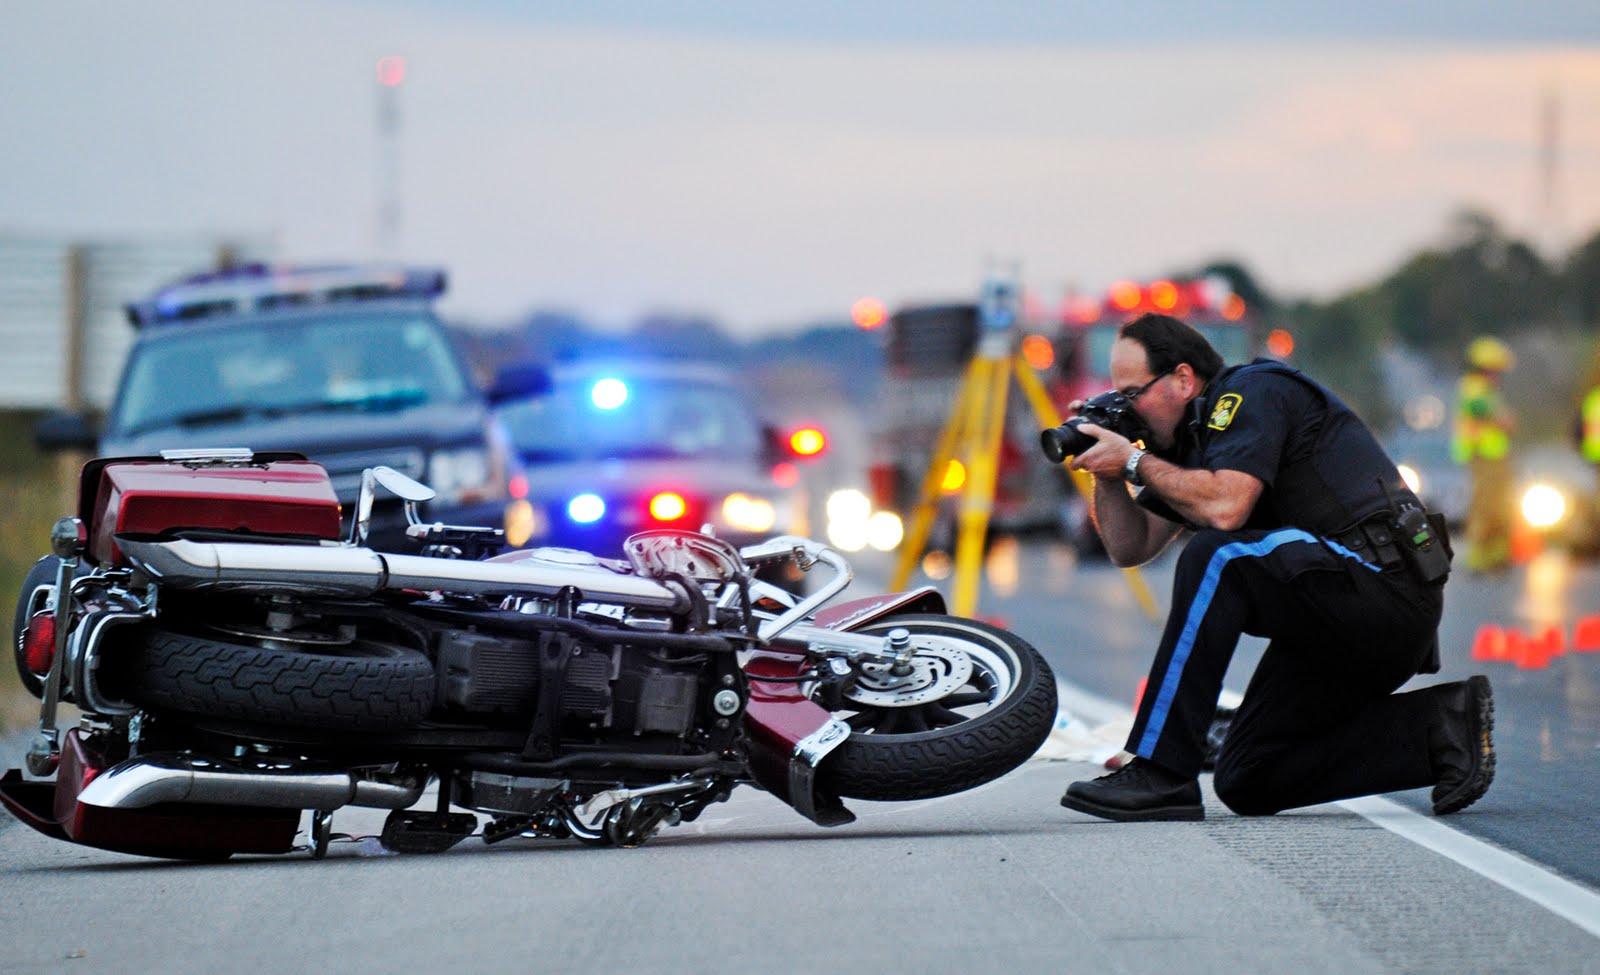 motorcycle accident scene with emergency vehicles in the background and a police officer kneeling in the foreground taking a photo of the toppled motorcycle